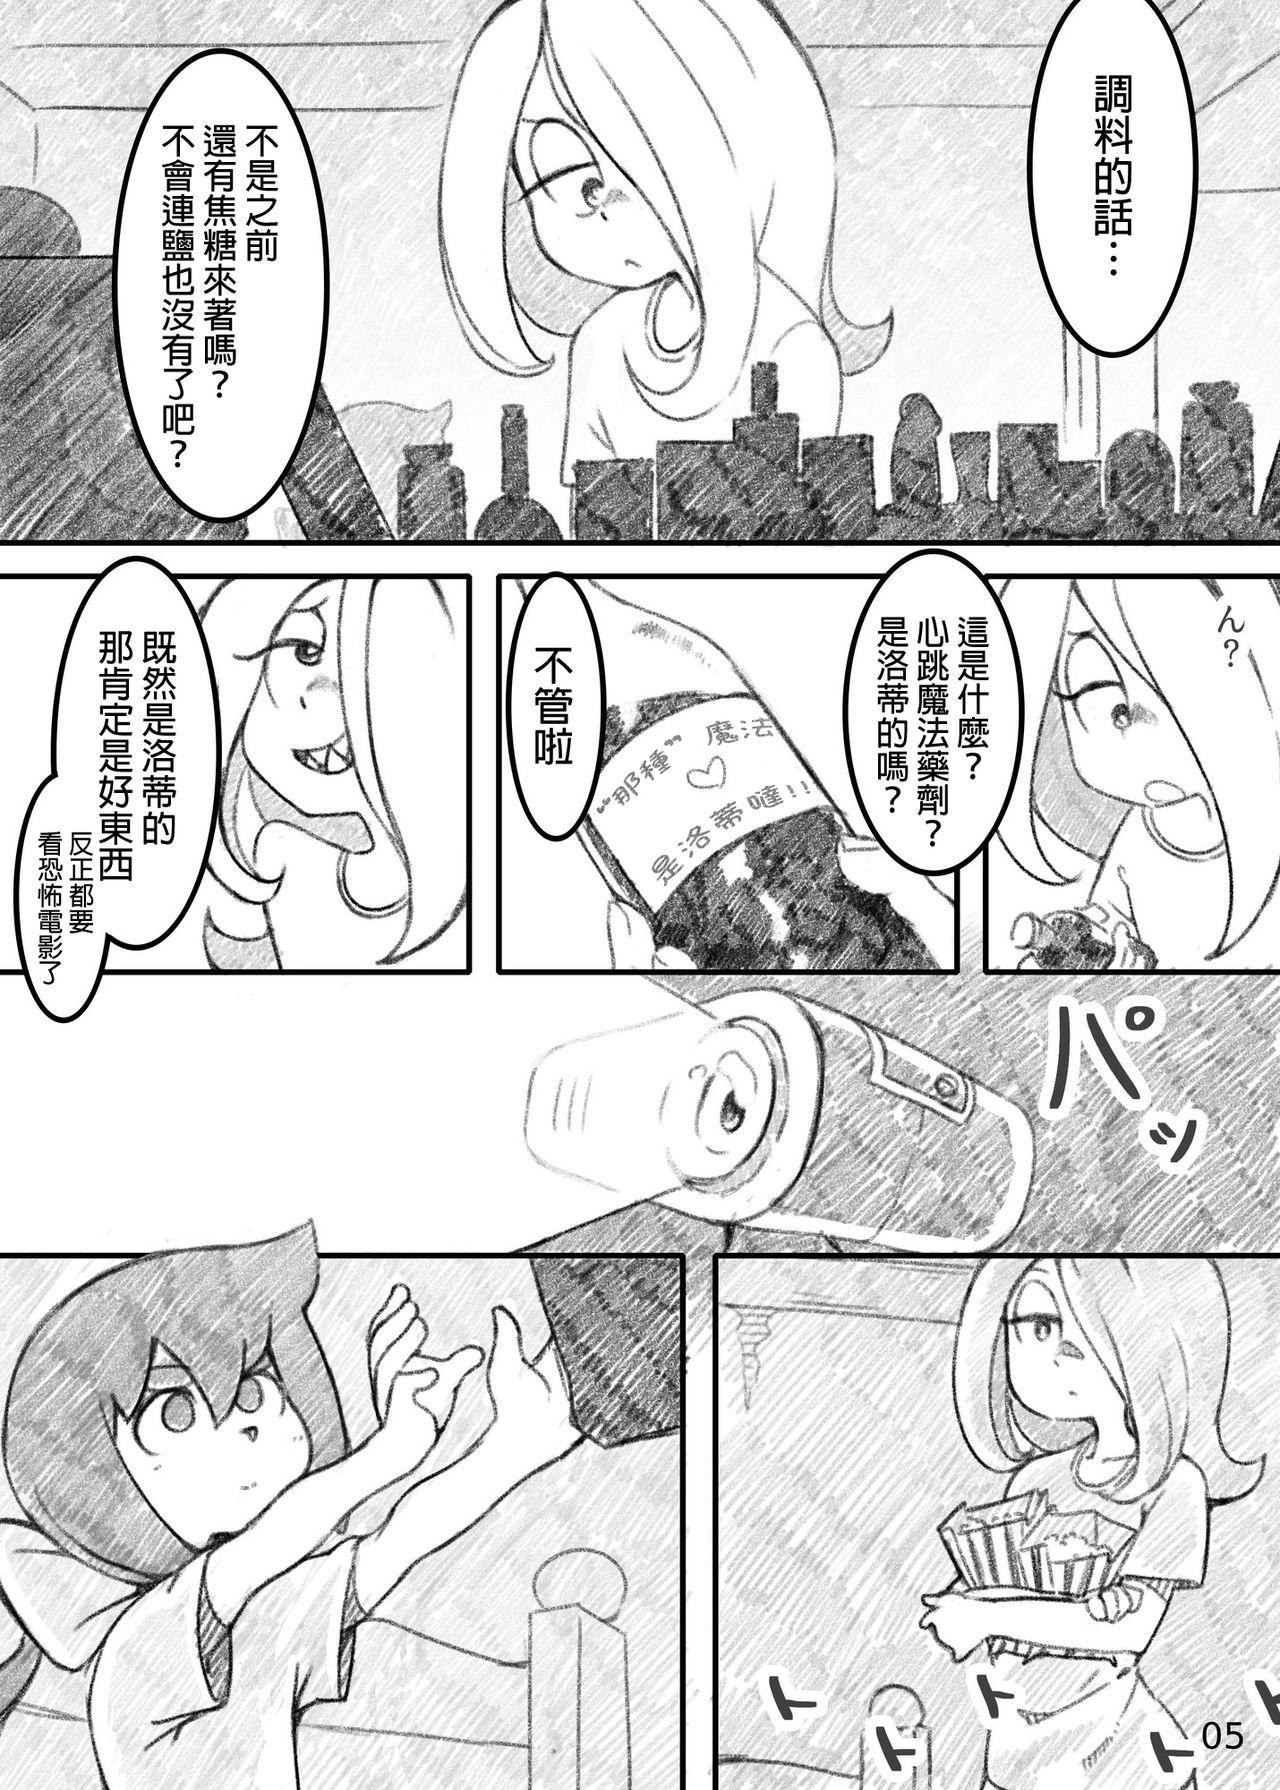 Bizarre Movie Night - Little witch academia Fucking - Page 5